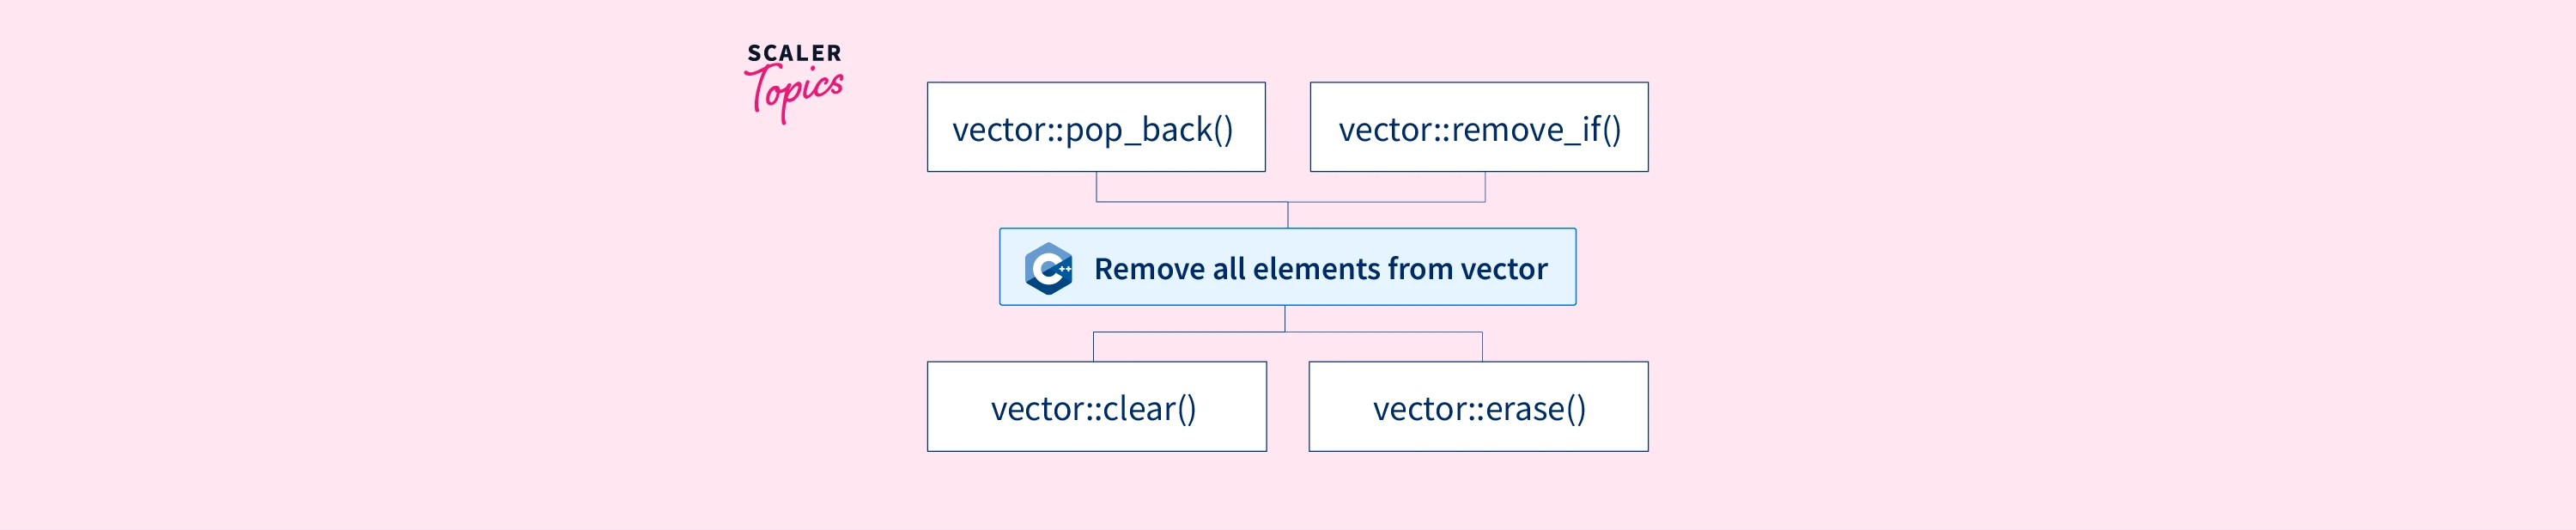 sejr kompensere Lover Which Method Removes All Elements From Vector in C++? | Scaler Topics